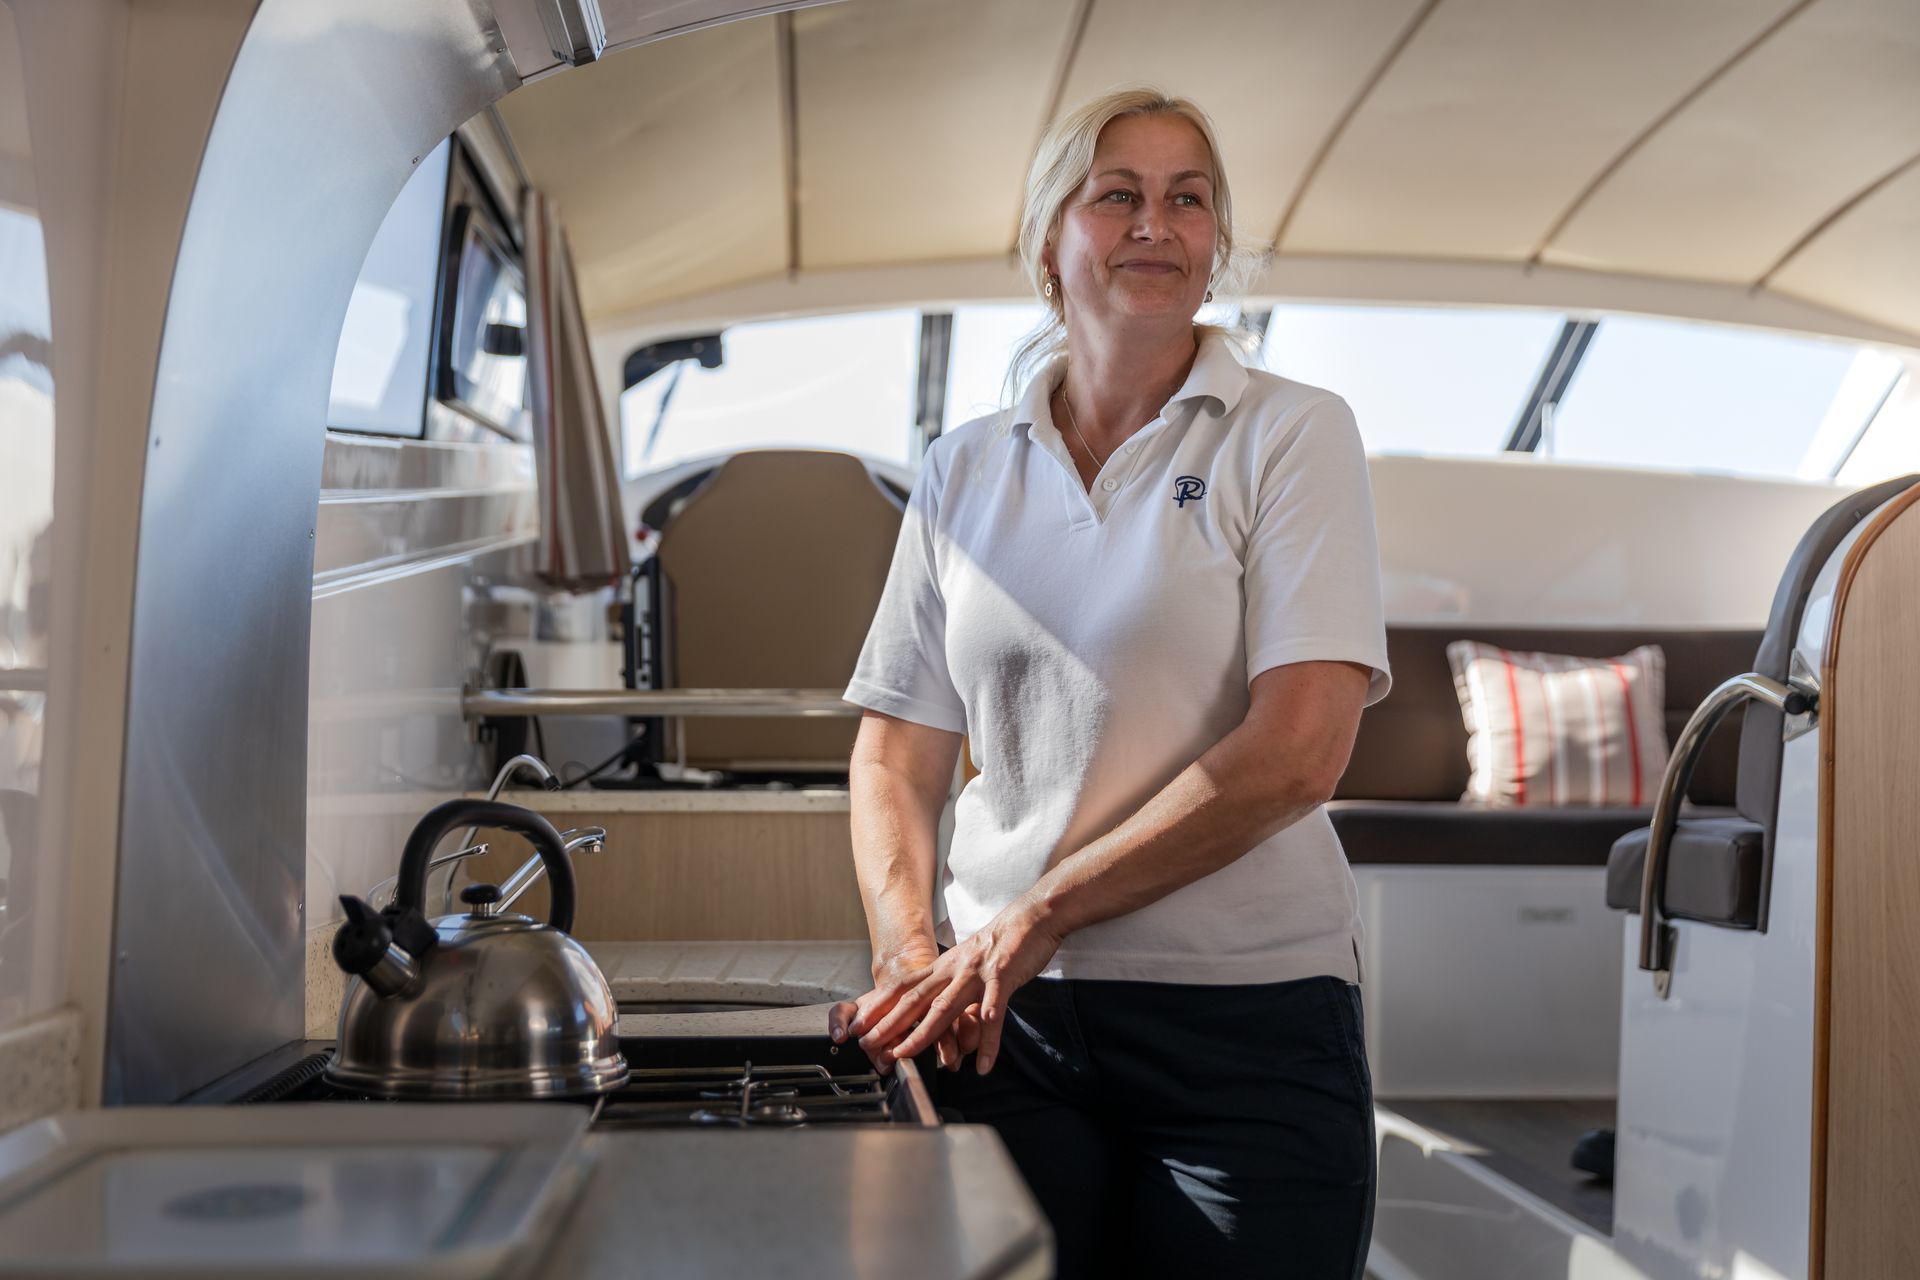 A woman is standing in a kitchen on a boat.